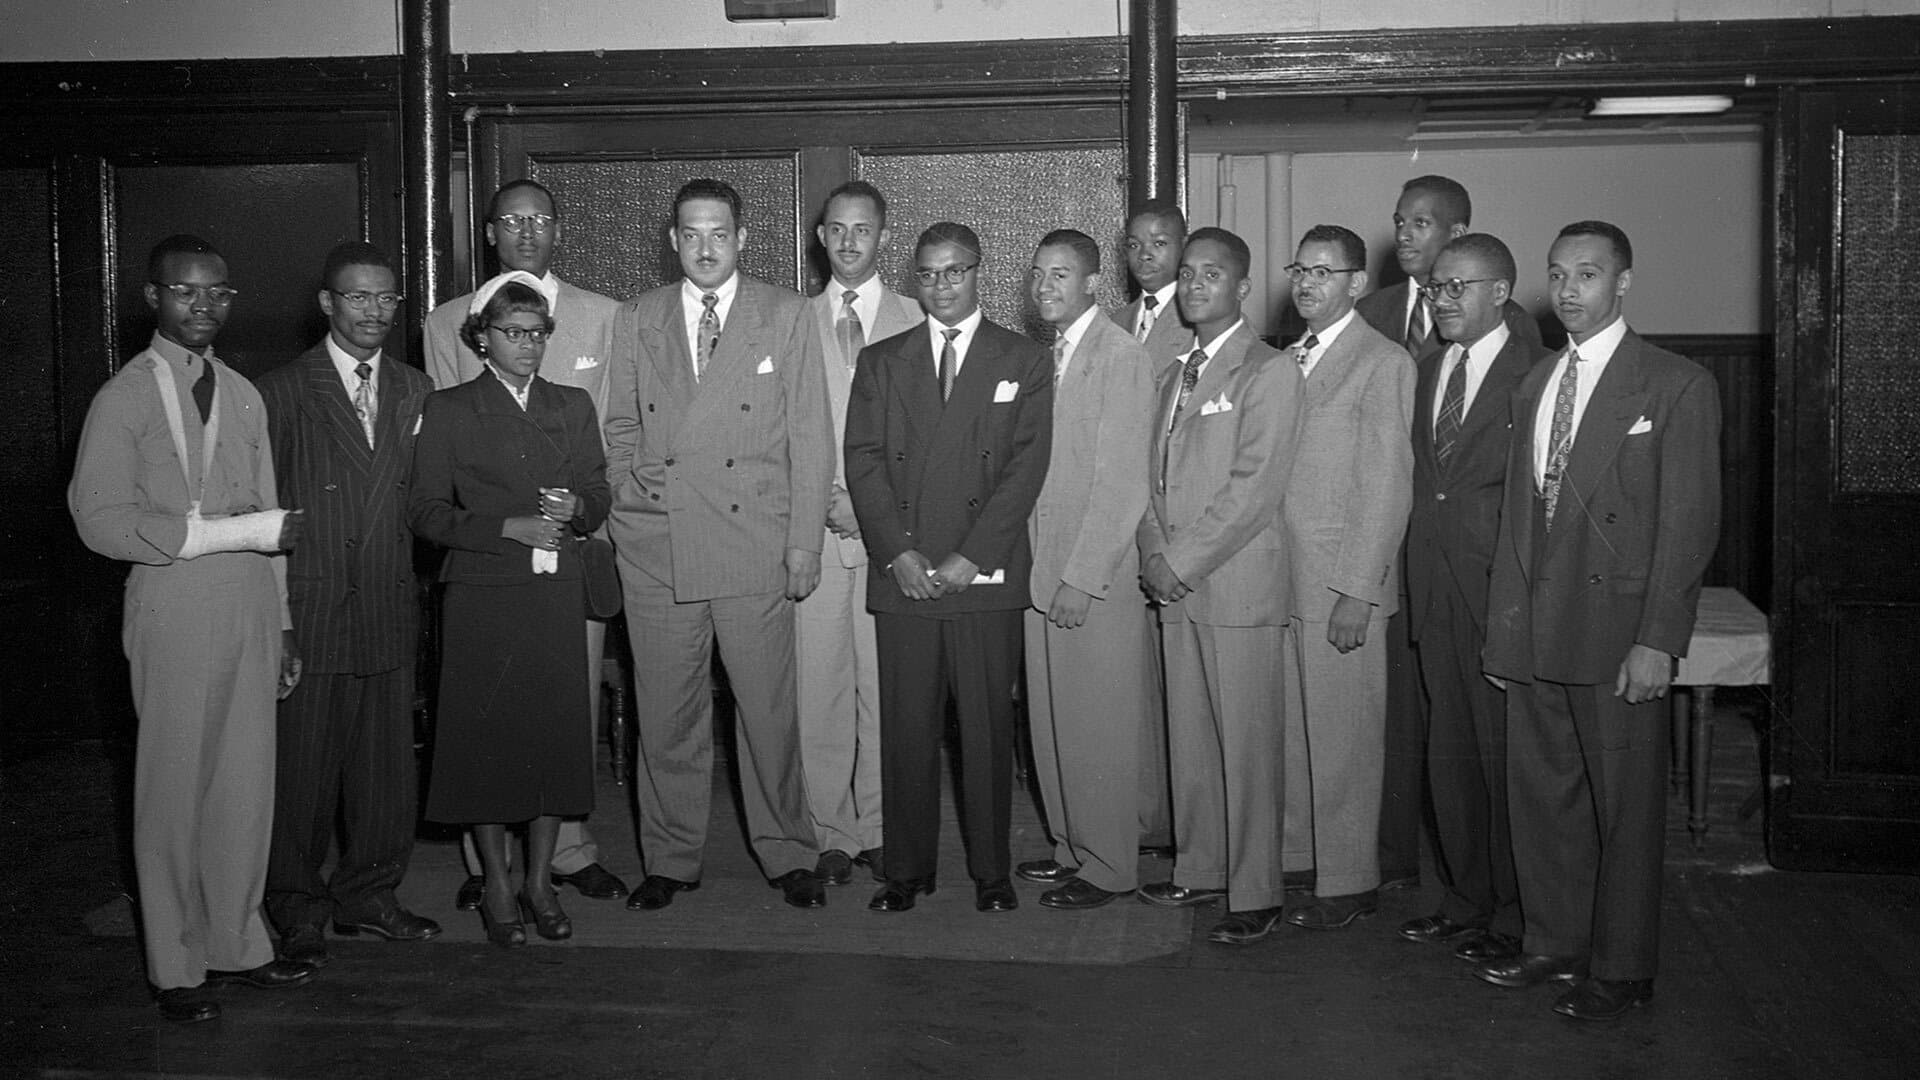 image ofIn this 1950 photo by Paul Henderson, then-NAACP lawyer Thurgood Marshall (fifth from right) is shown with other civil rights activists, including future UMD students Hiram Whittle (sixth from right) and Parren Mitchell (far right). Courtesy of the Maryla